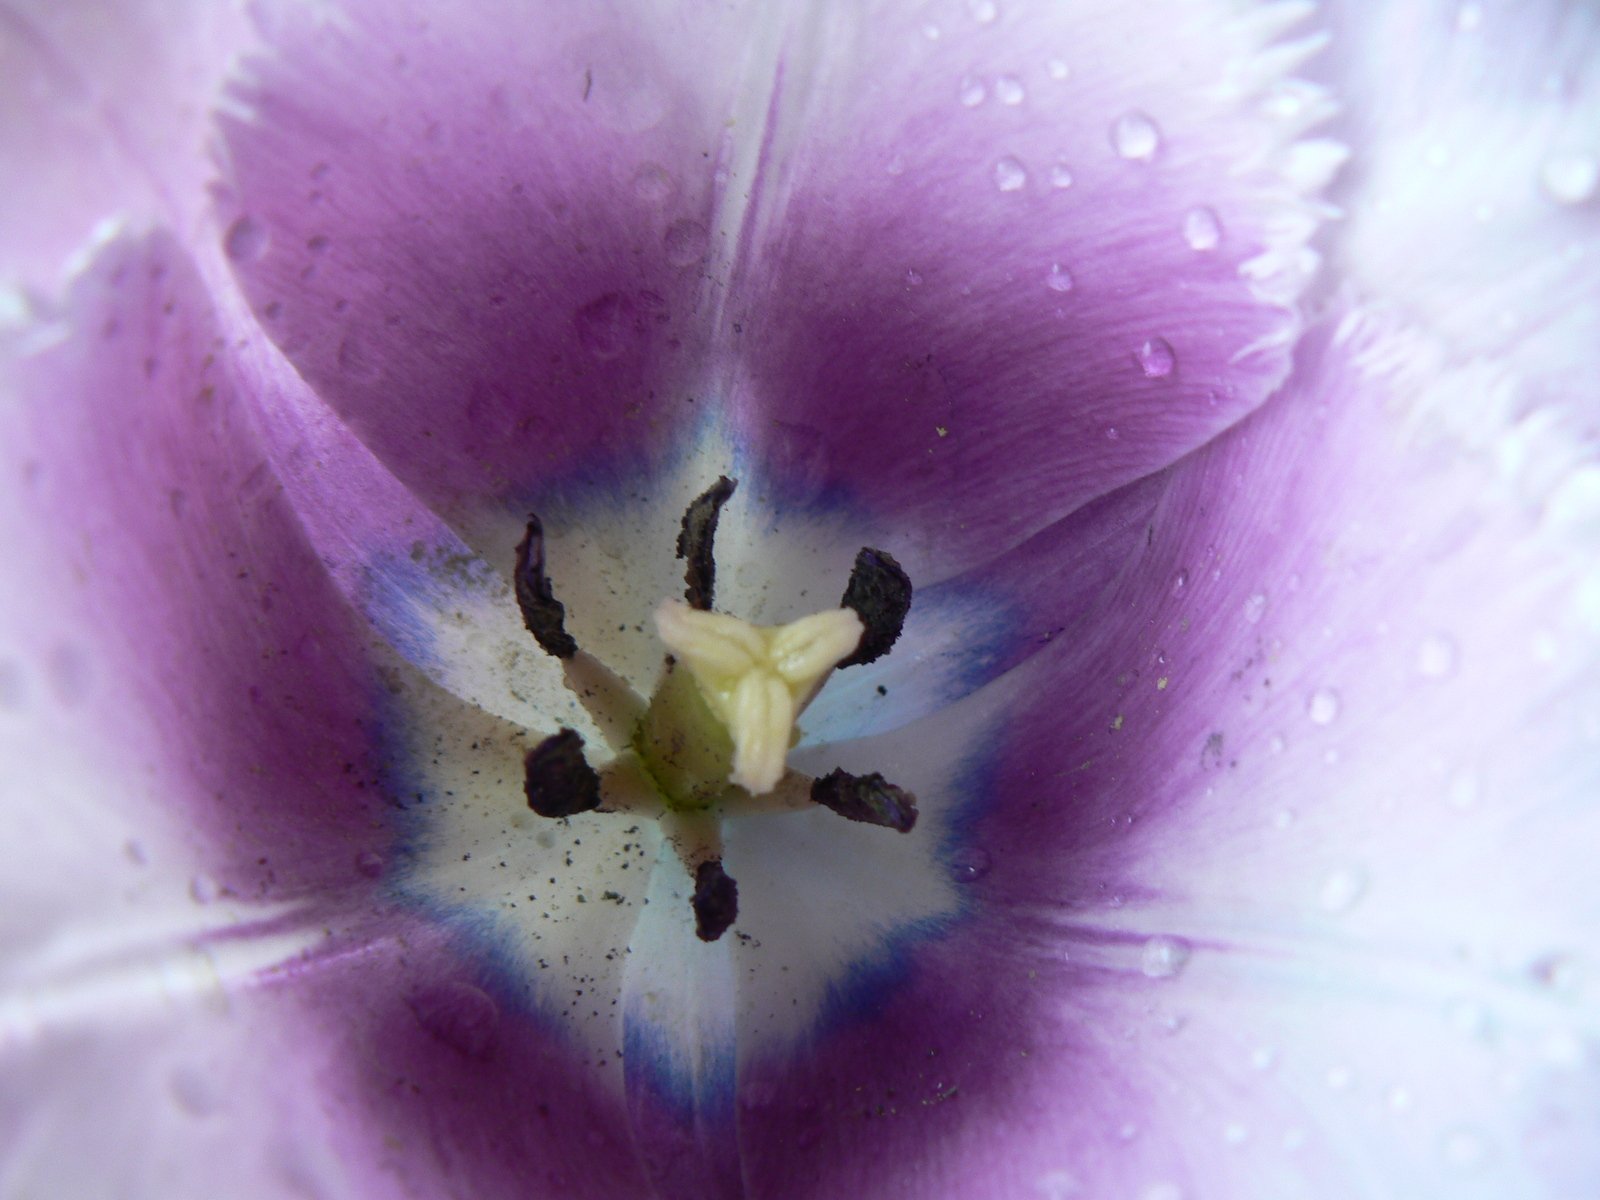 a close up view of a purple flower with dew drops